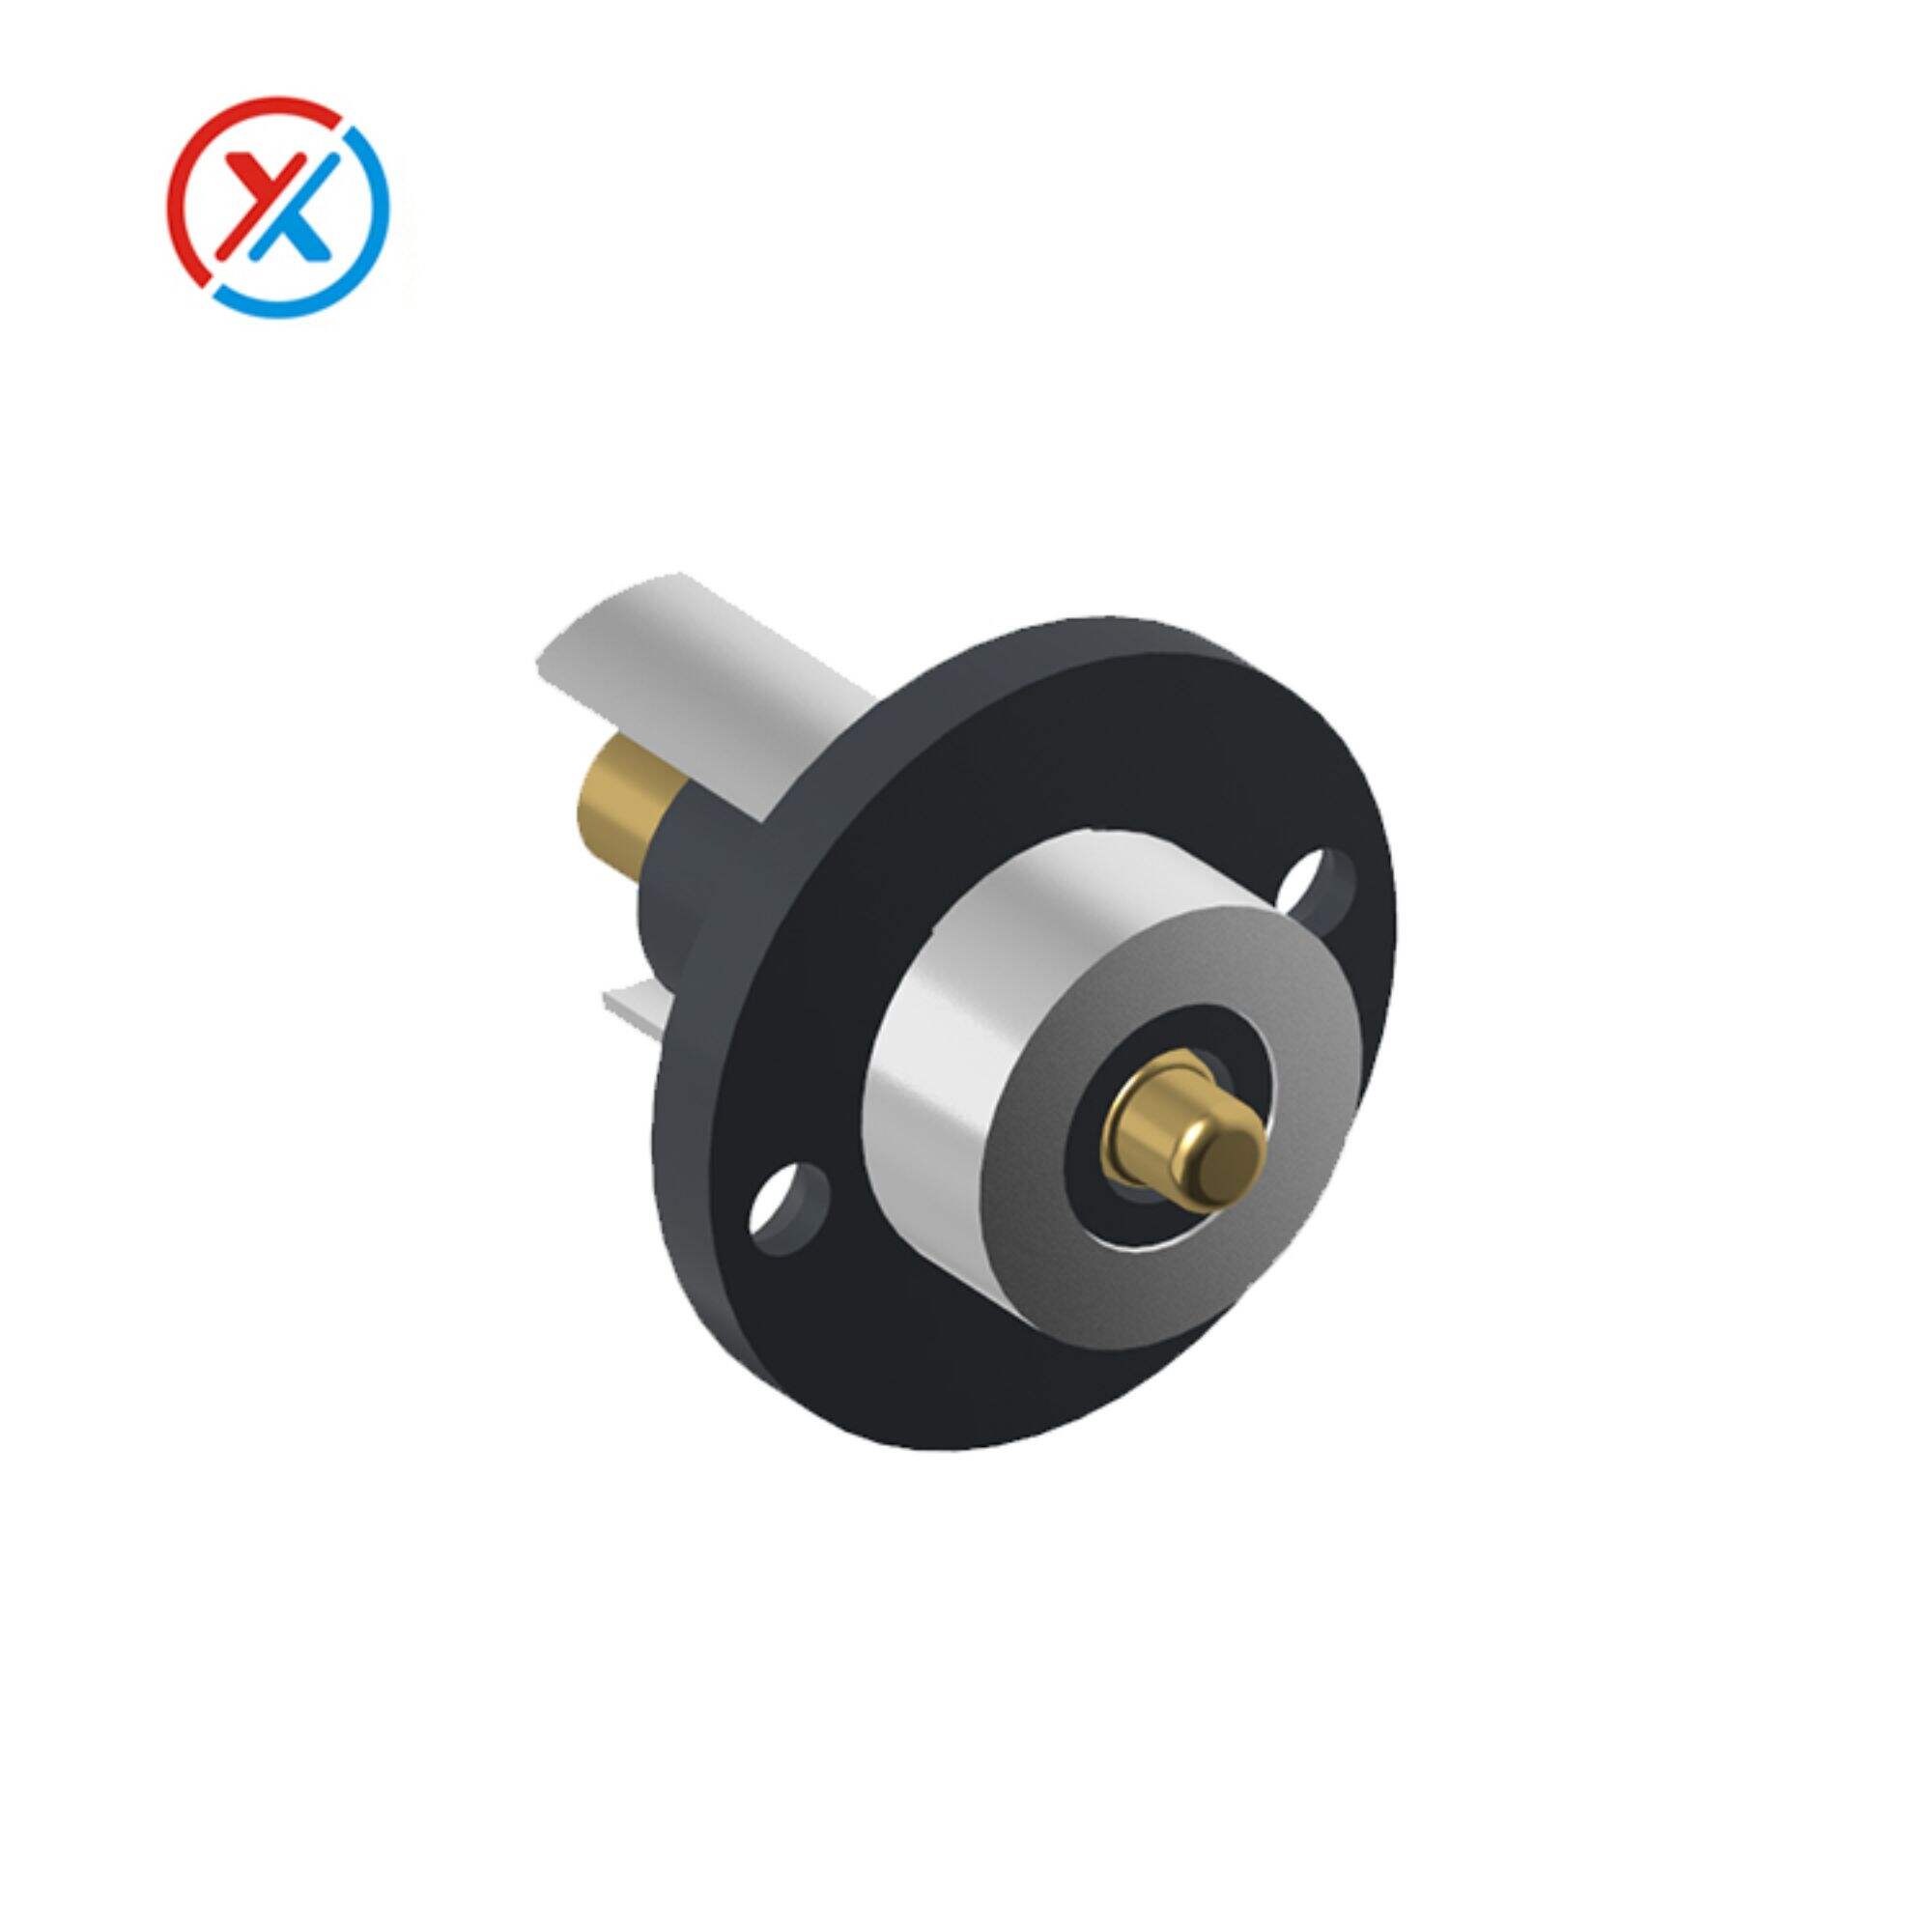 Circular magnetic connector pogo magnetic connector male and female base customization